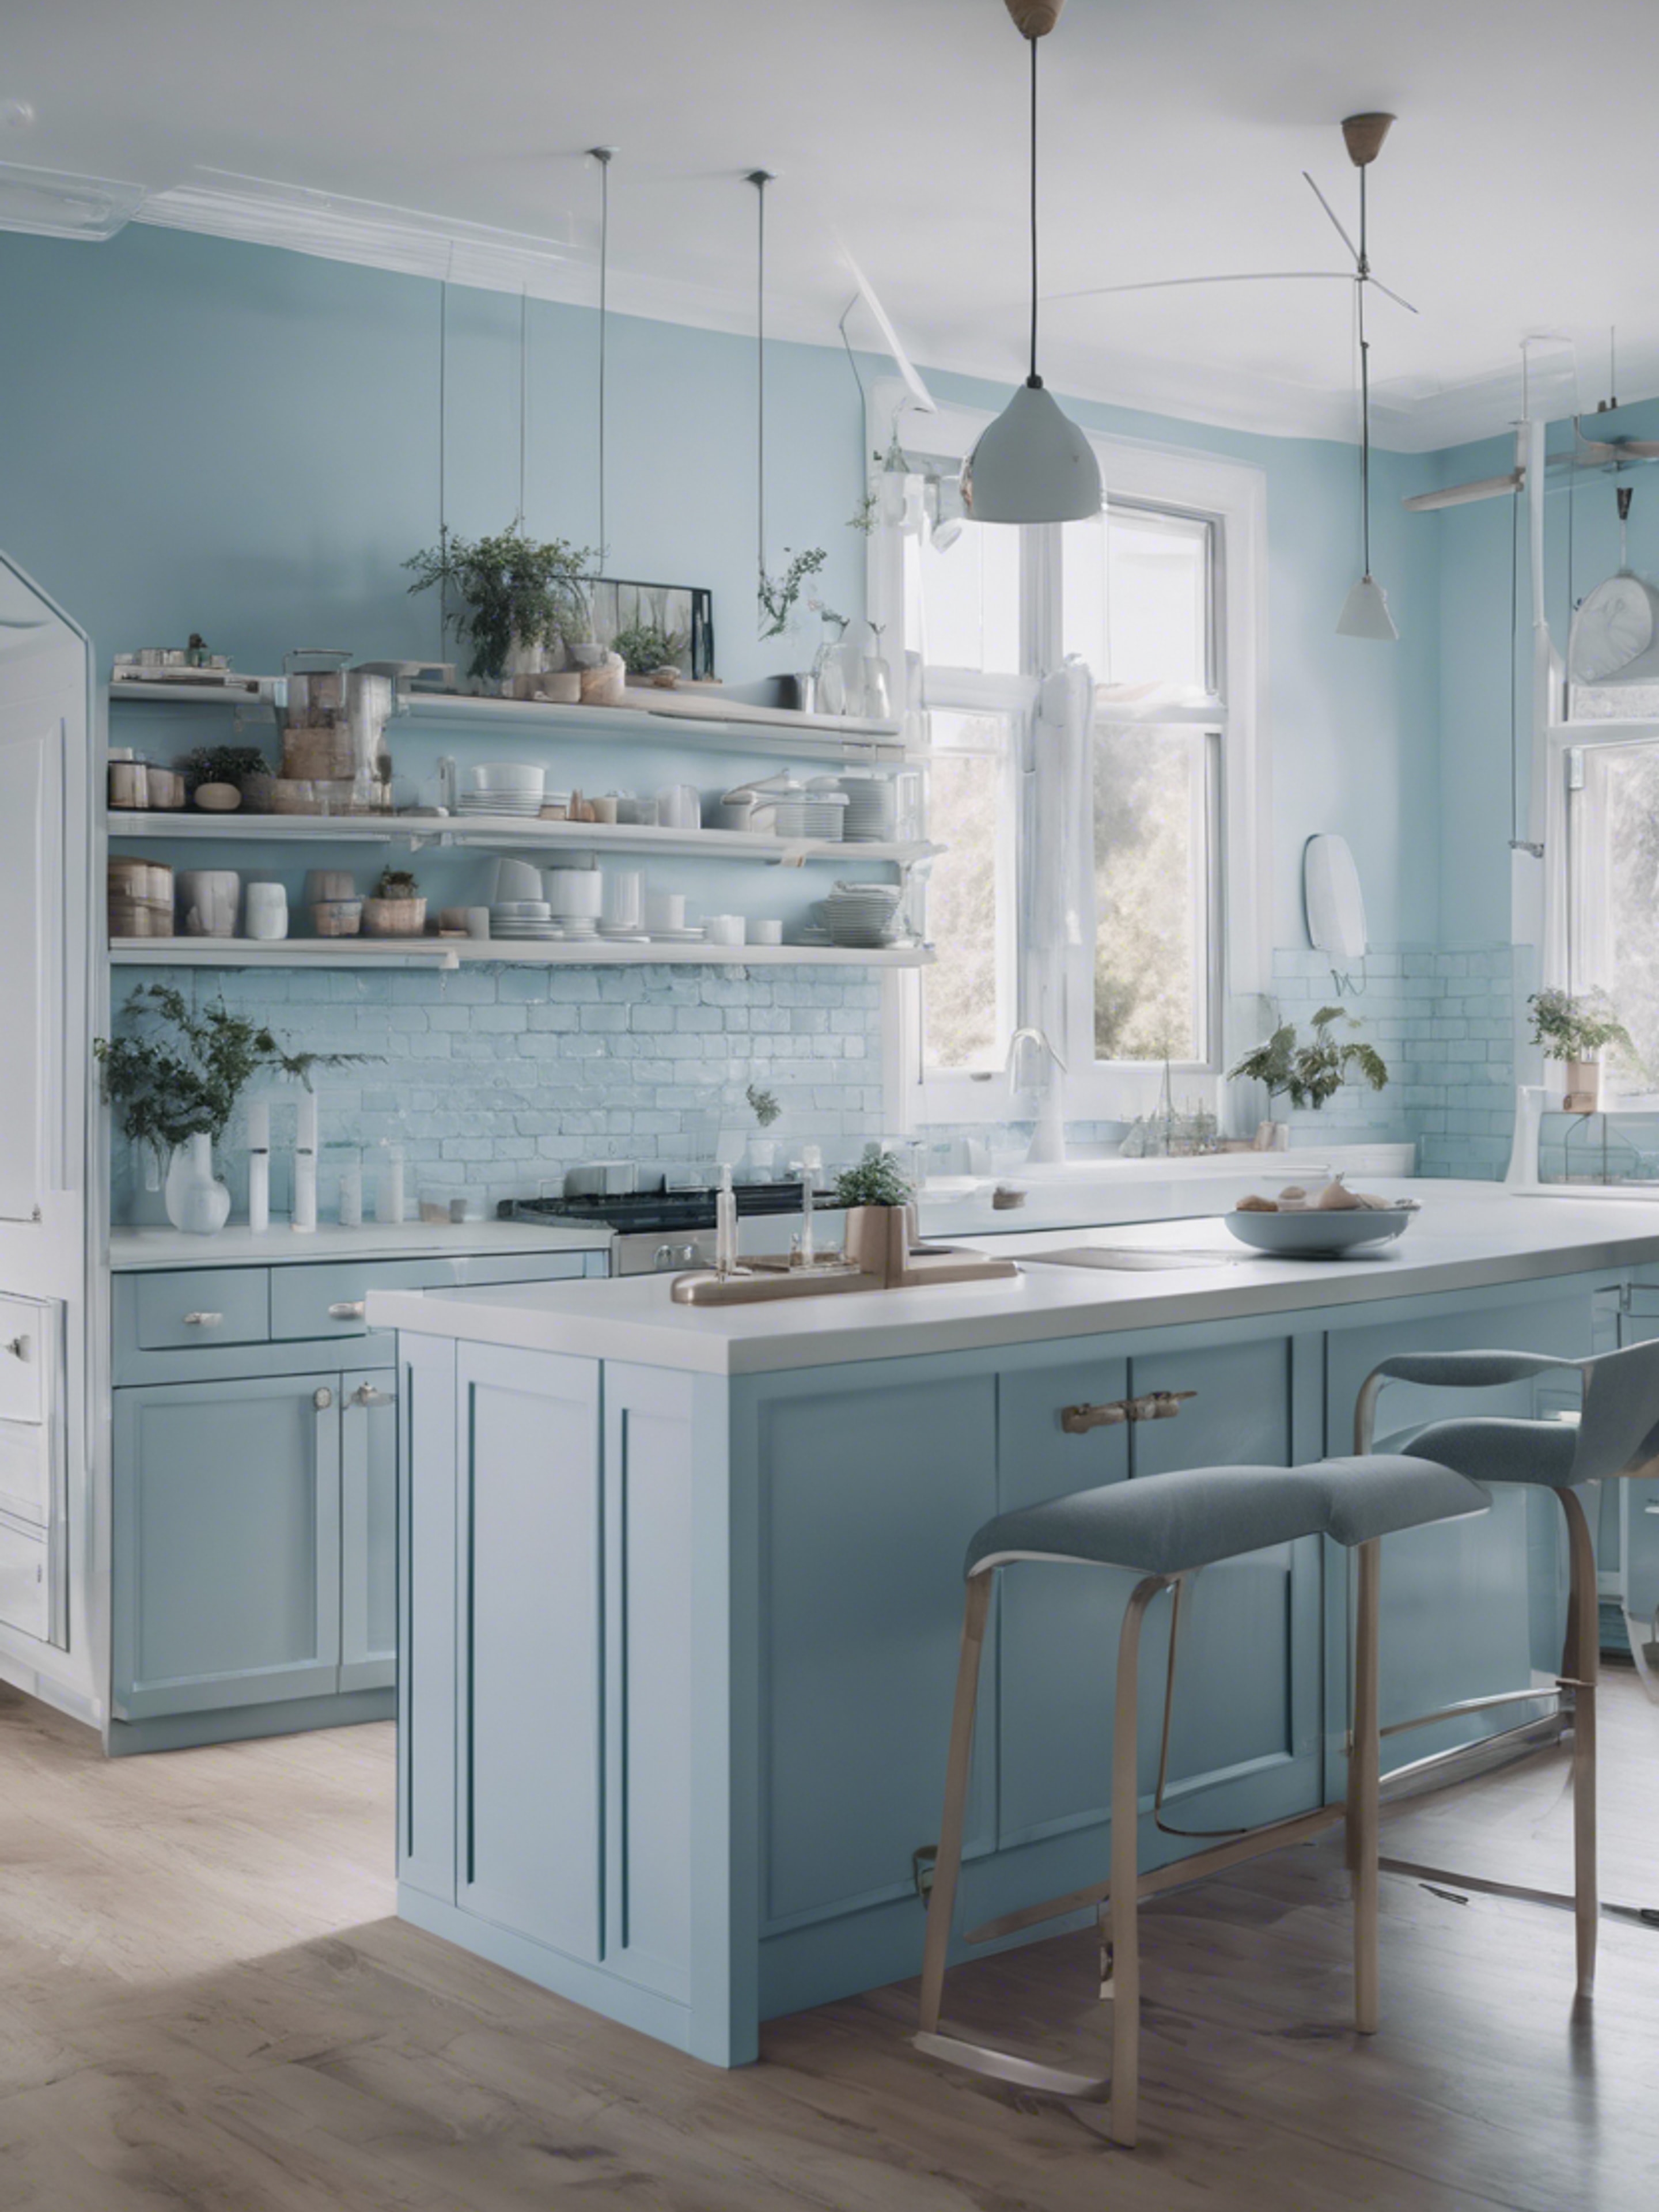 An open concept kitchen with pastel blue decor and modern, chic styling. Wallpaper[473c0827d42a49cfa964]